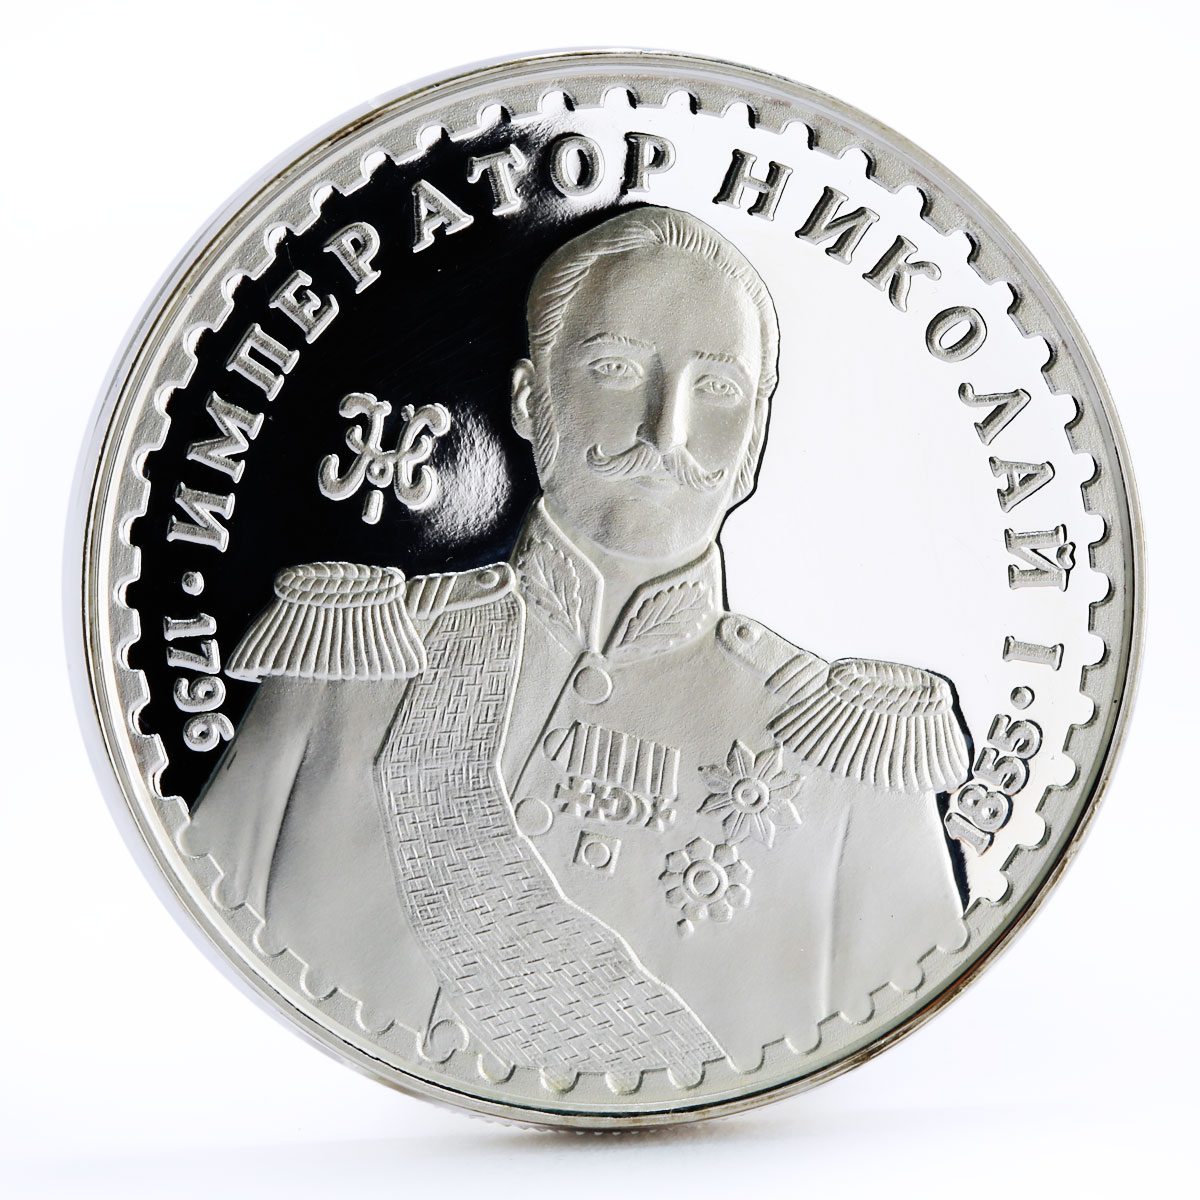 Russia Russian Tsars series Nicholas the First proof silver medal